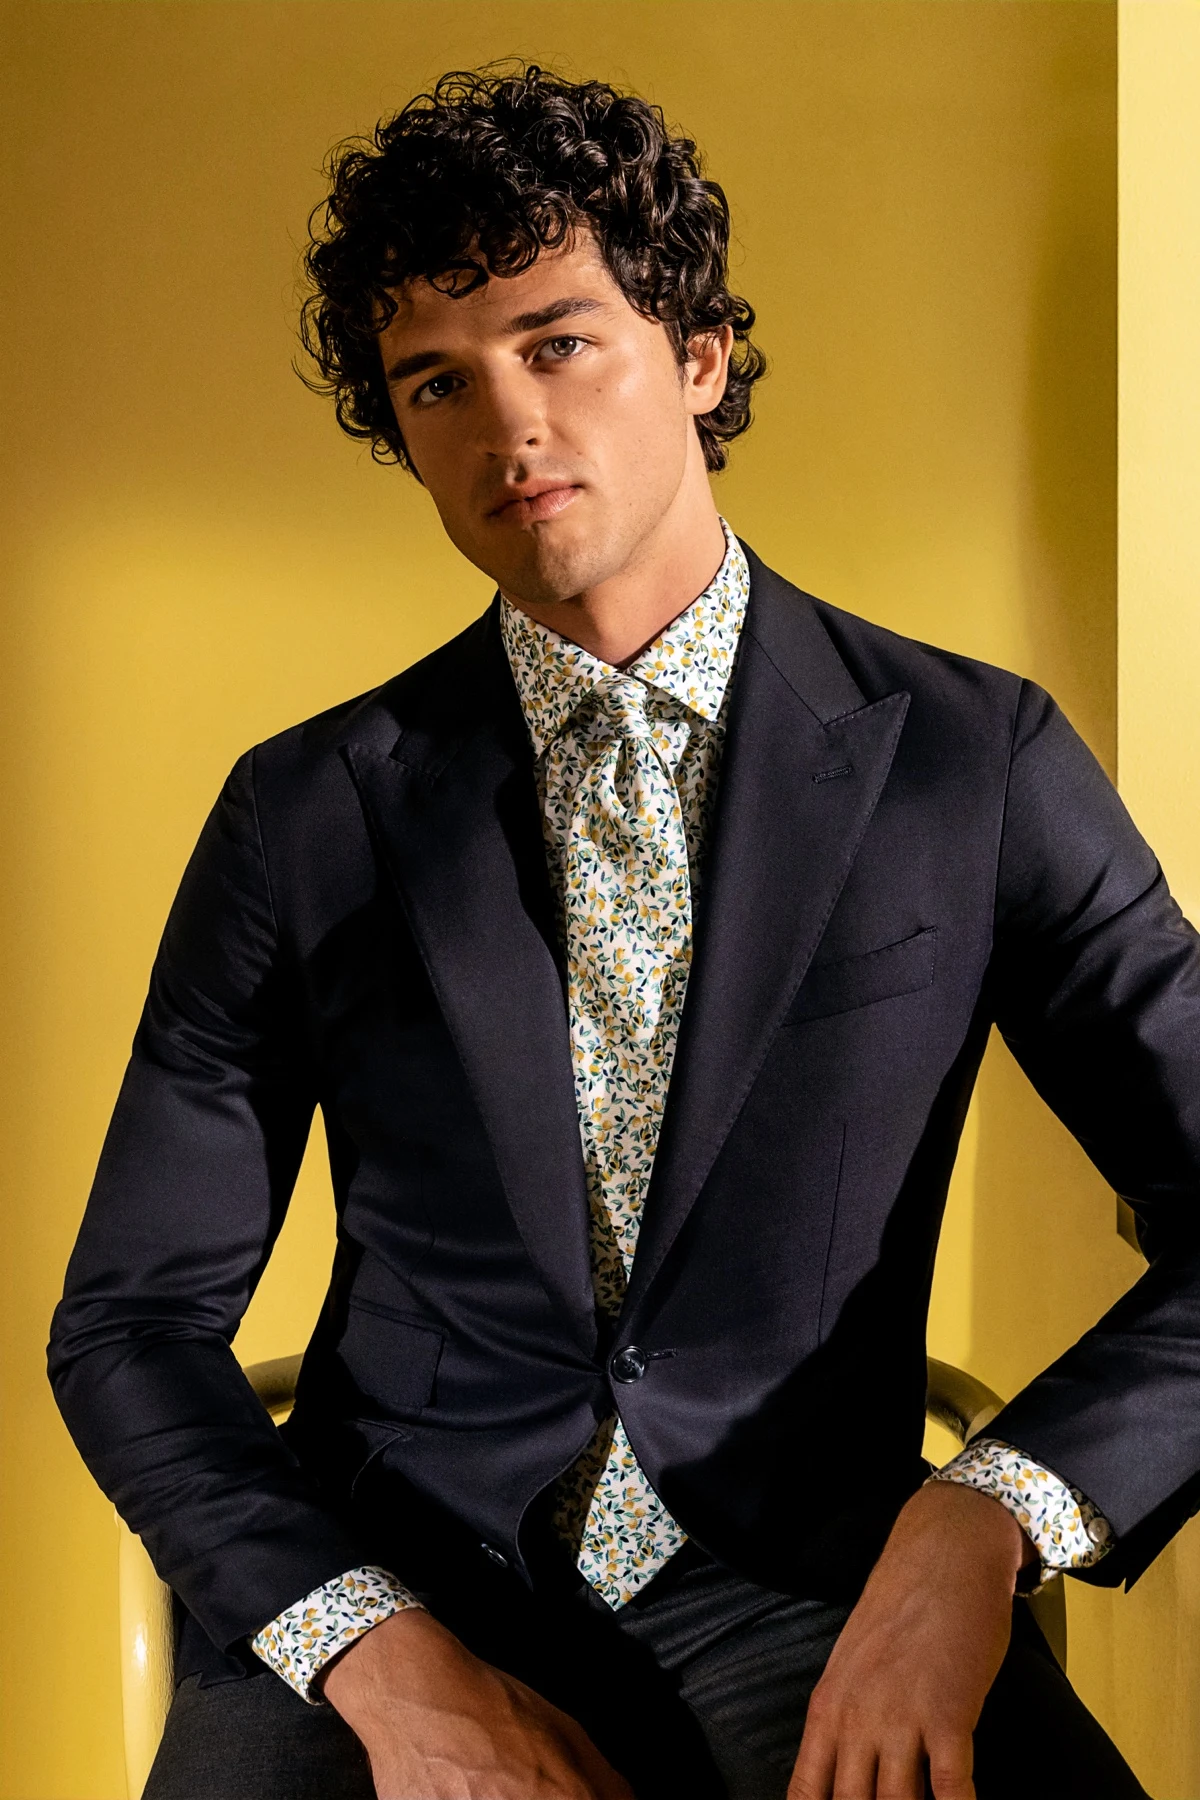 lemon shirt and tie with suit on model